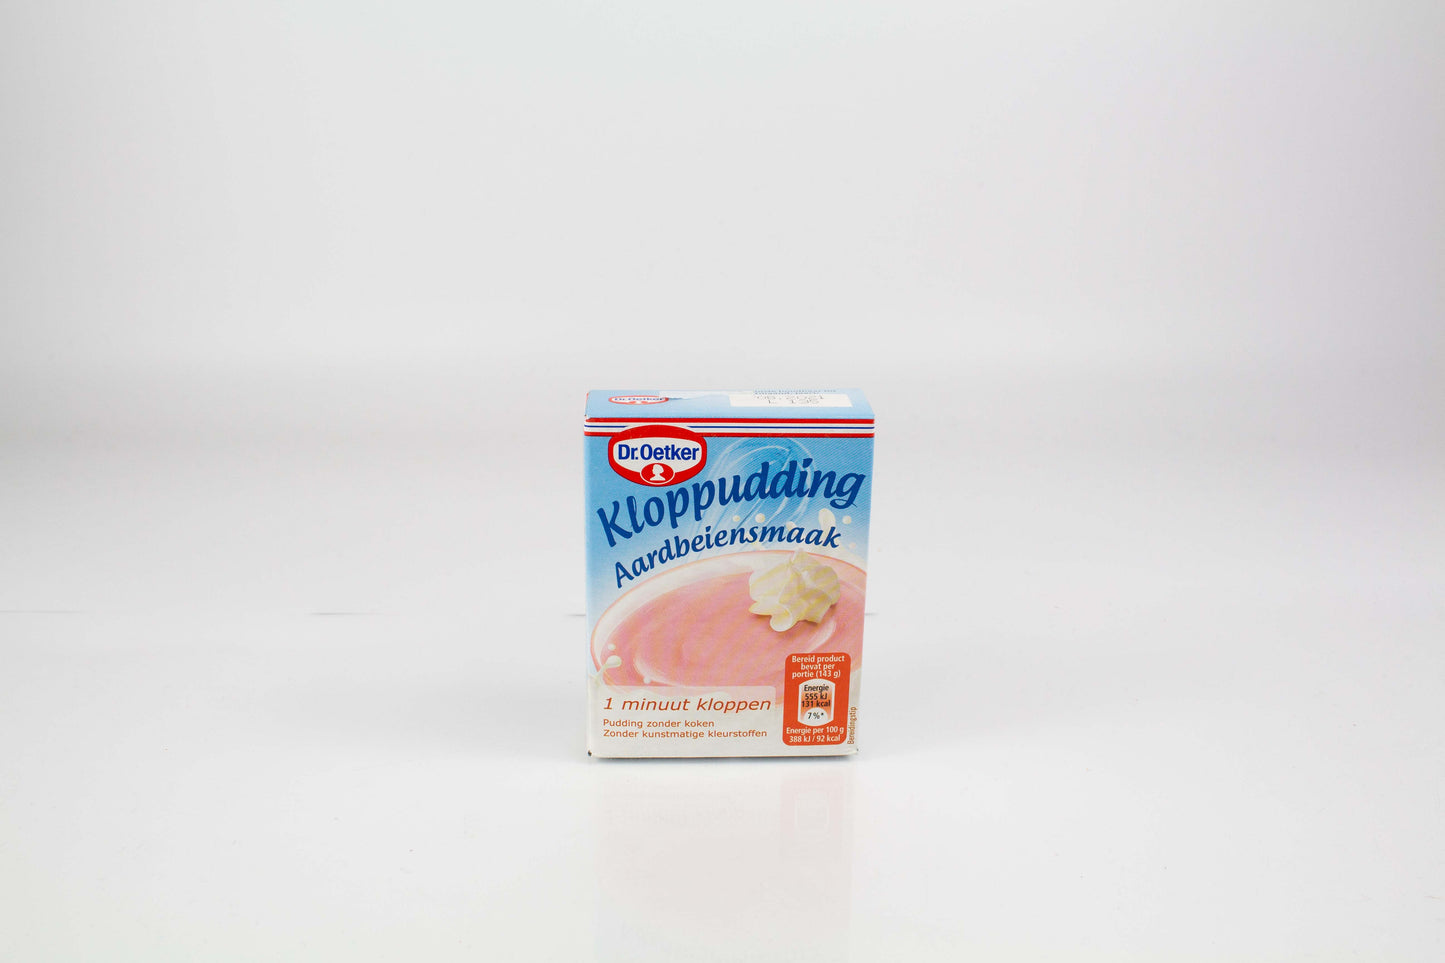 Dr Oetker Whipped Pudding Strawberry